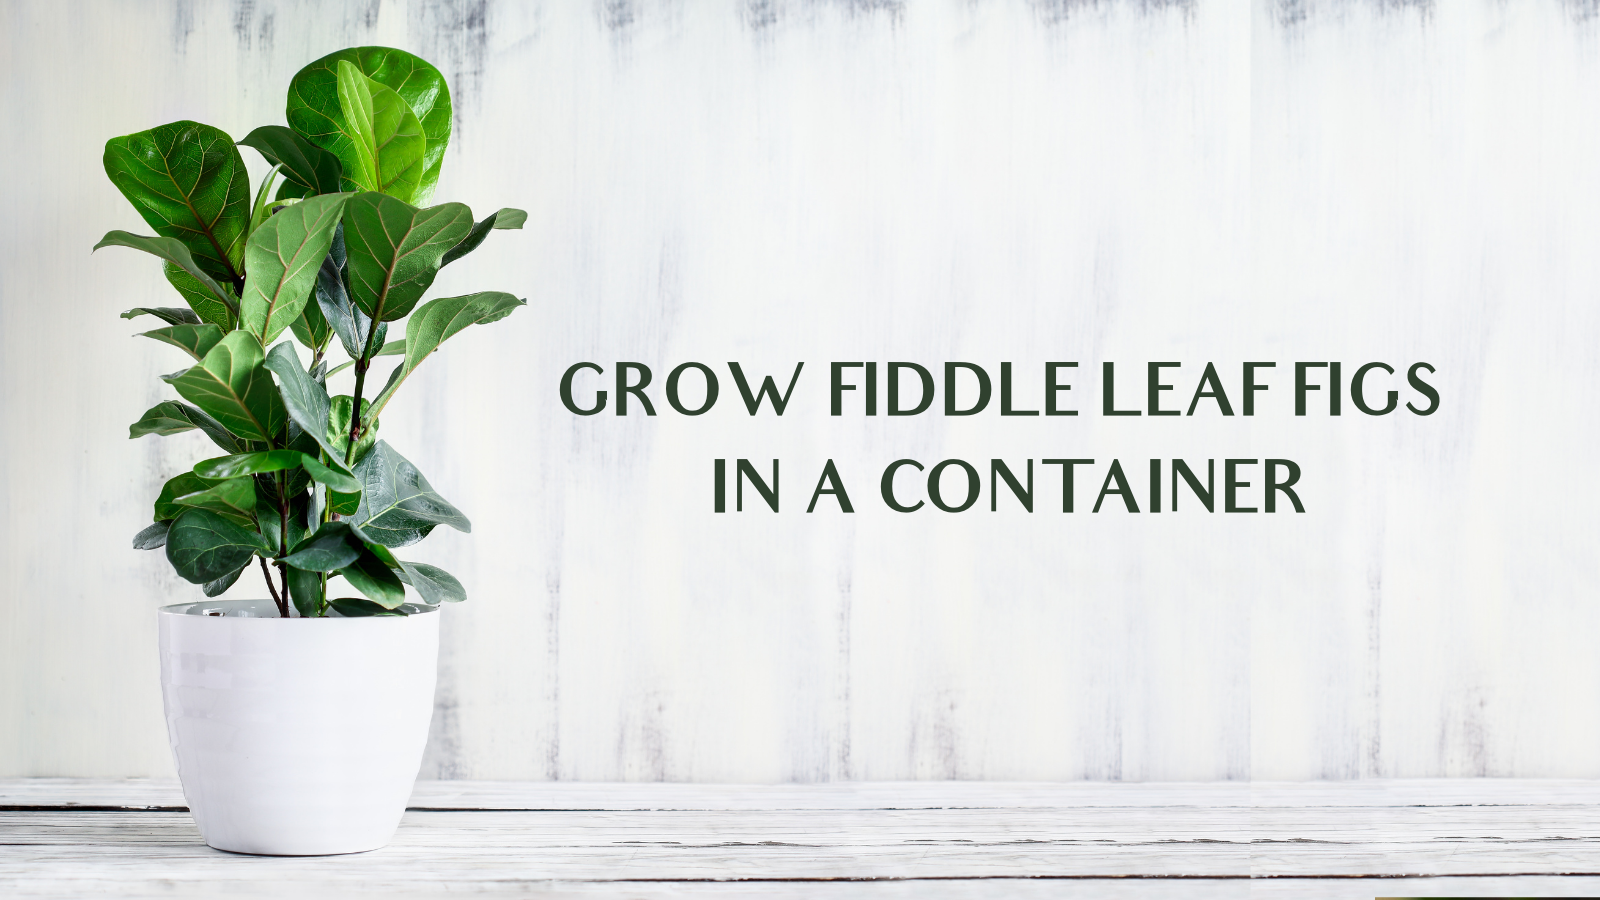 Easy Steps To Grow Fiddle Leaf Figs In A Container